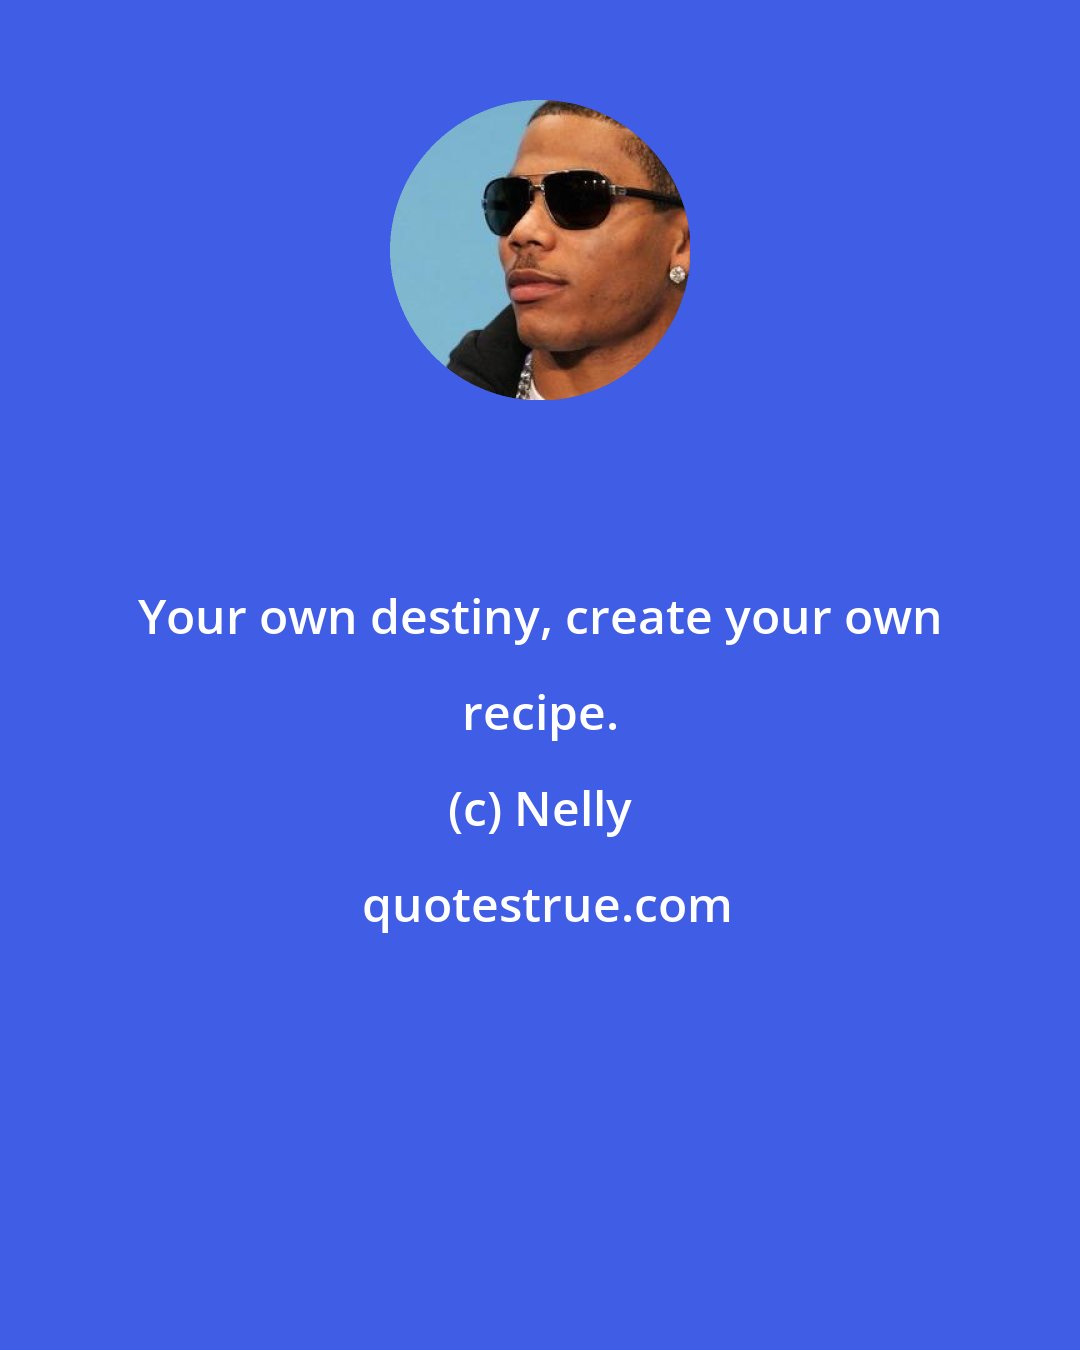 Nelly: Your own destiny, create your own recipe.